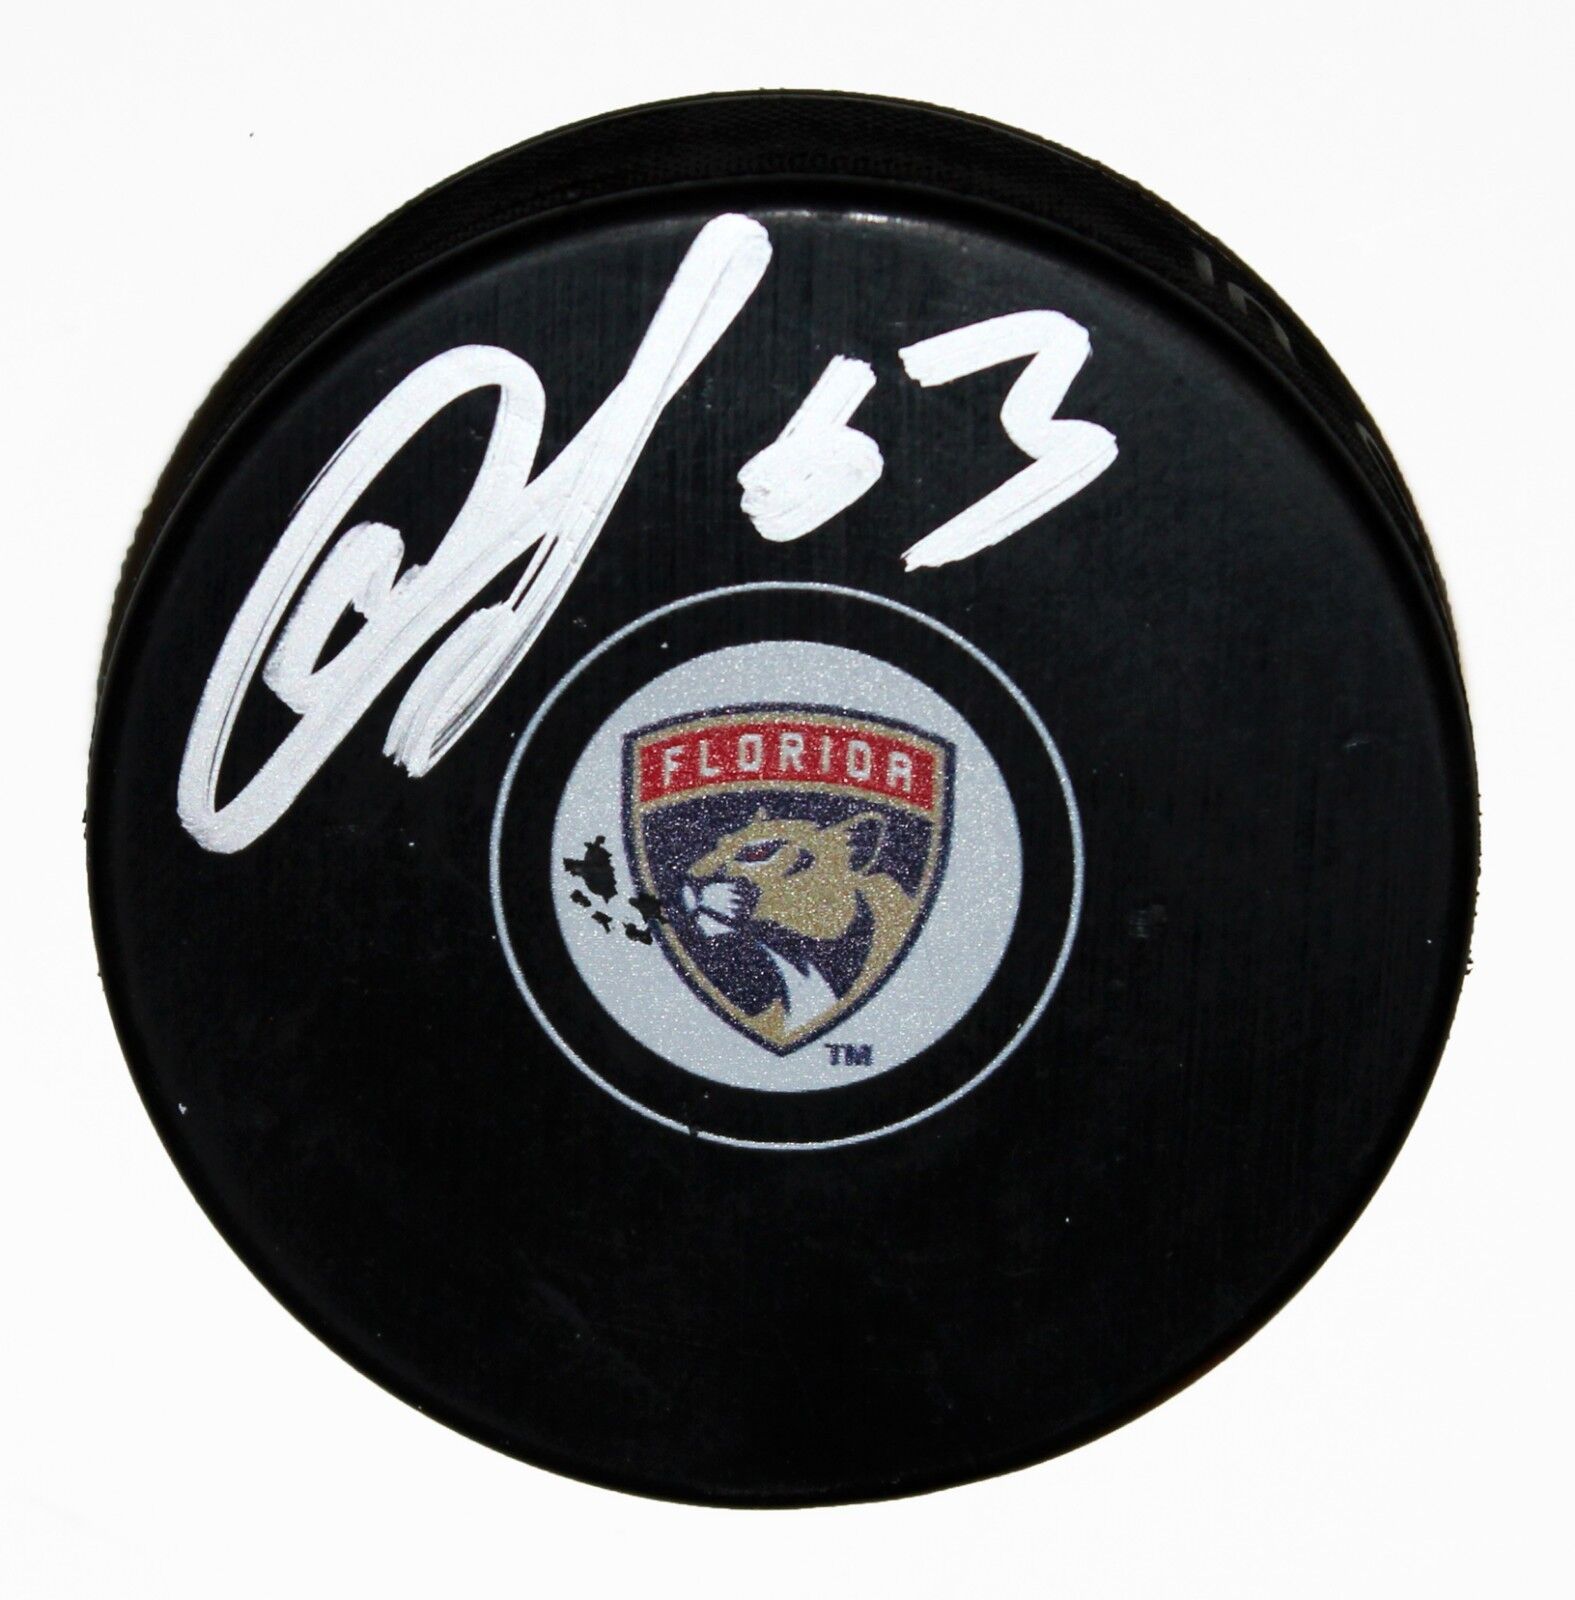 EVGENII DADONOV SIGNED FLORIDA PANTHERS Puck ROOKIE STAR RUSSIA AUTOGRAPHED +COA